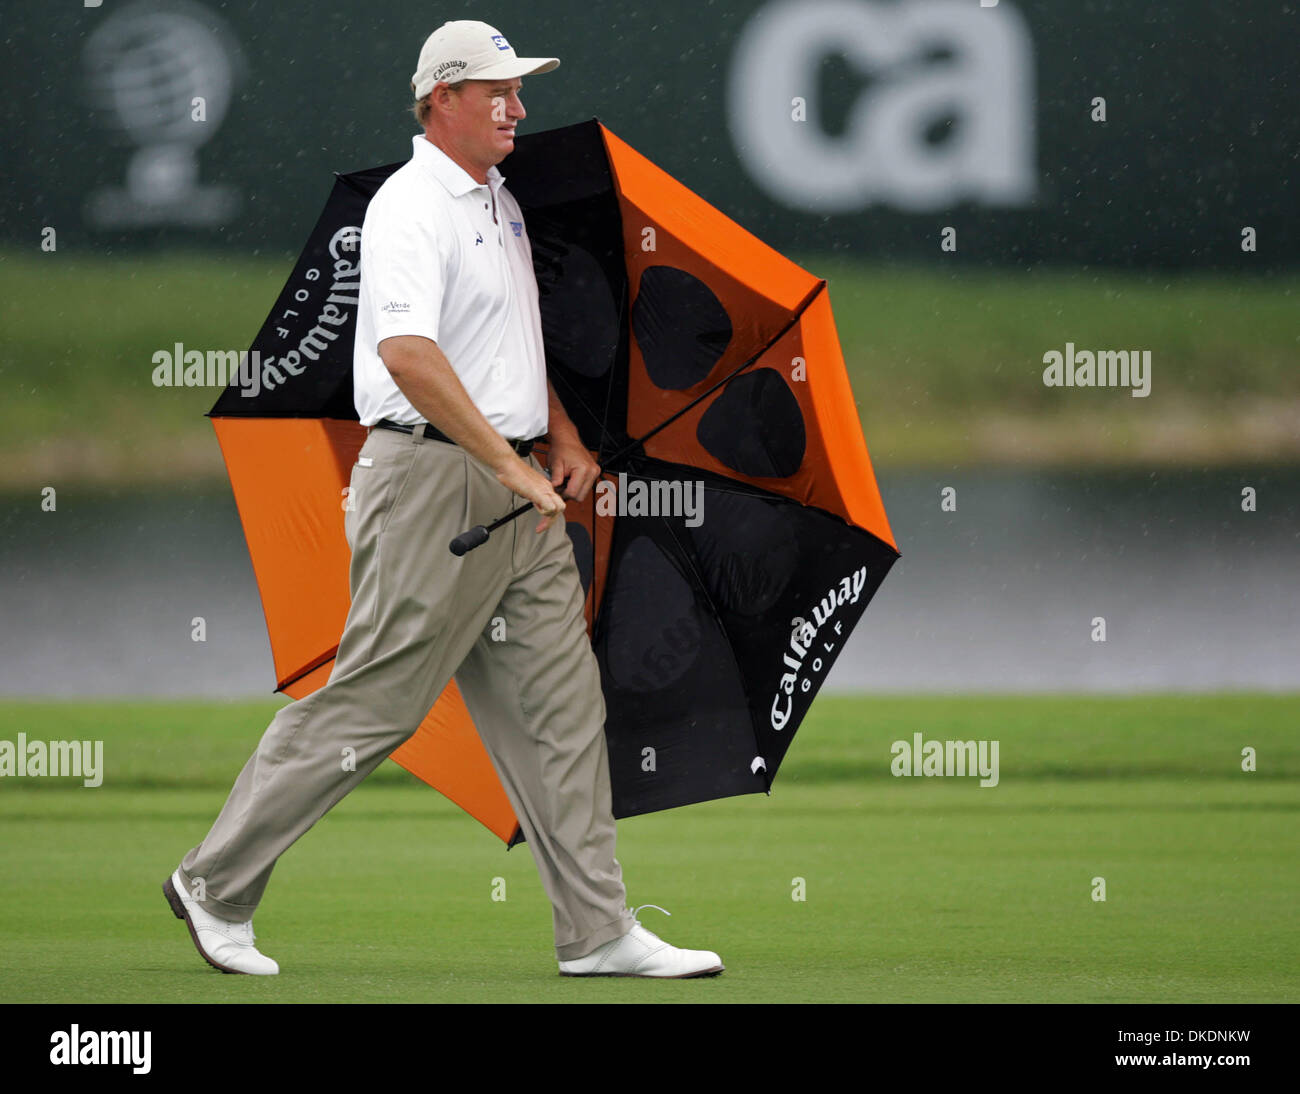 Mar 22, 2007 - Doral, FL, USA - ERNIE ELS walks up the 18th fairway during a rain shower. Els finished at 2 under par. (Credit Image: © Allen Eyestone/Palm Beach Post/ZUMA Press) RESTRICTIONS: USA Tabloid RIGHTS OUT! Stock Photo